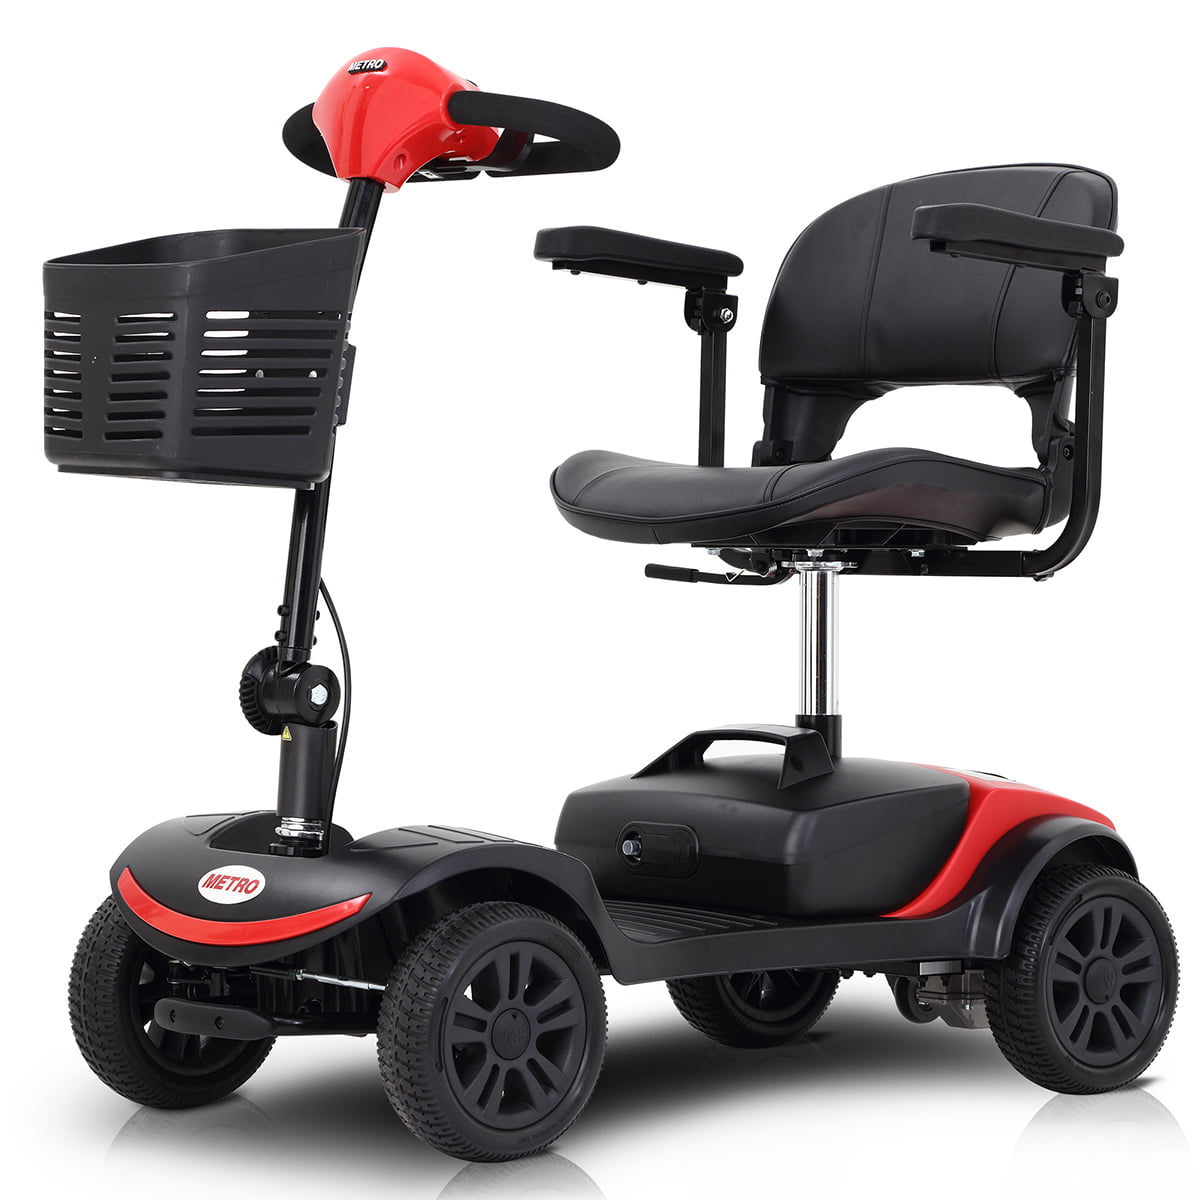 HDJ 10 Miles Folding Electric Scooter Powered Electric Scooter Mobility Scooters for Seniors Adults,4 Wheel Compact Mobile Scooter with Charger and Basket,330 lbs Max Weight